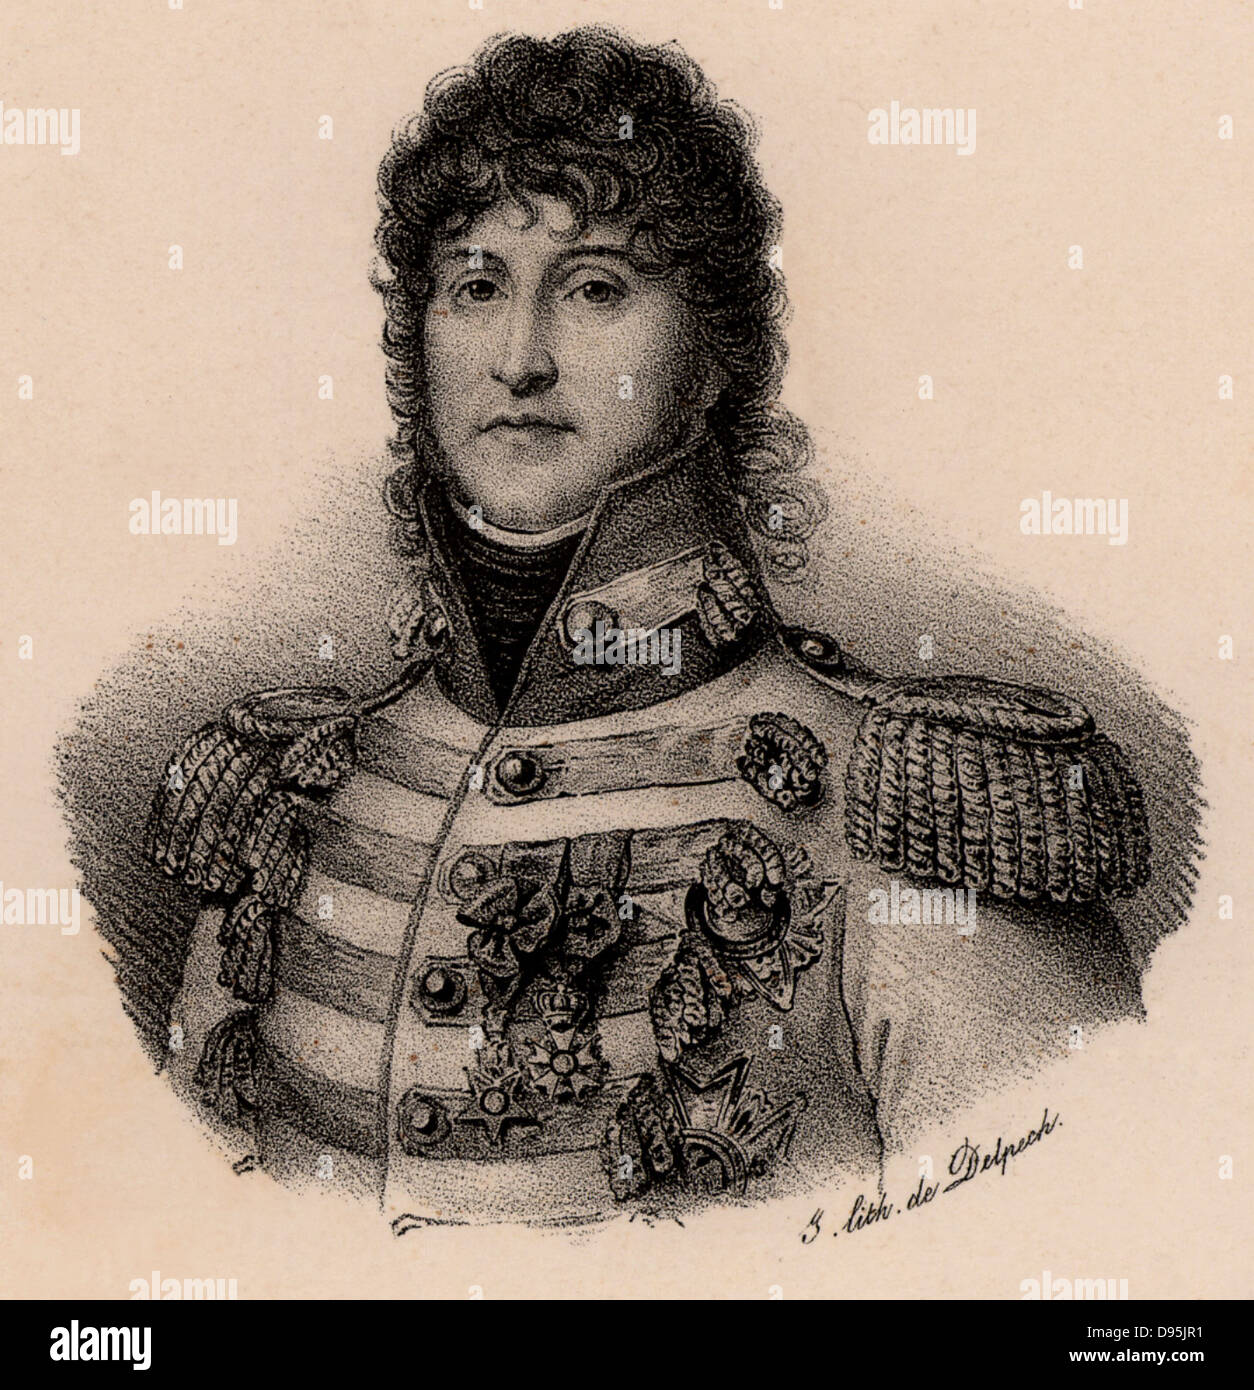 Joachim Murat (1767-1815) French soldier. Created king of Naples in 1808. He married Napoleon Bonaparte's sister Caroline. He contributed to victories at Marengo, Austerlitz, Jena and Eylau. After Napoleon's final defeat, he was court-martialled and shot. Stock Photo